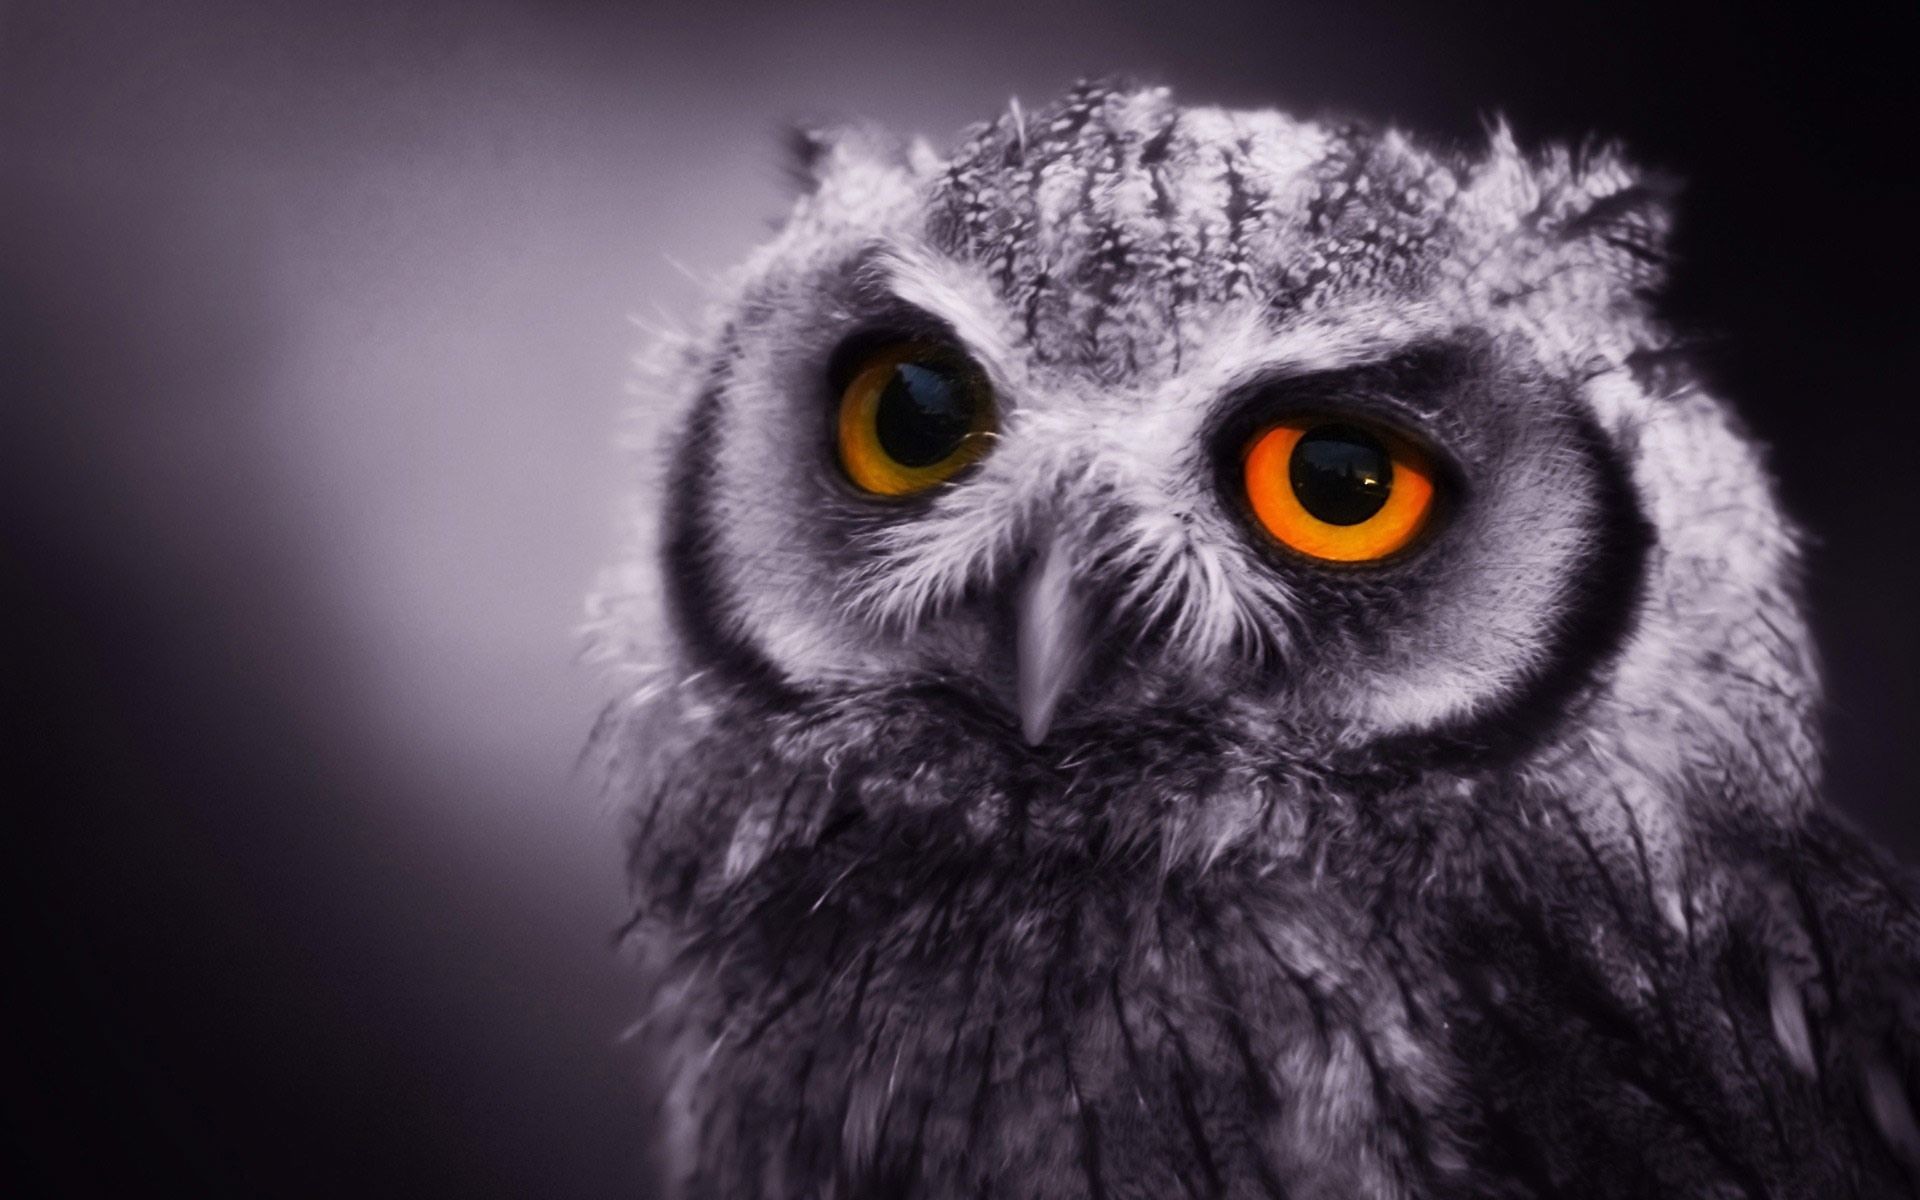 Owl HD Wallpapers Backgrounds Wallpaper | HD Wallpapers | Pinterest | Owl  wallpaper, Owl and Wallpaper backgrounds